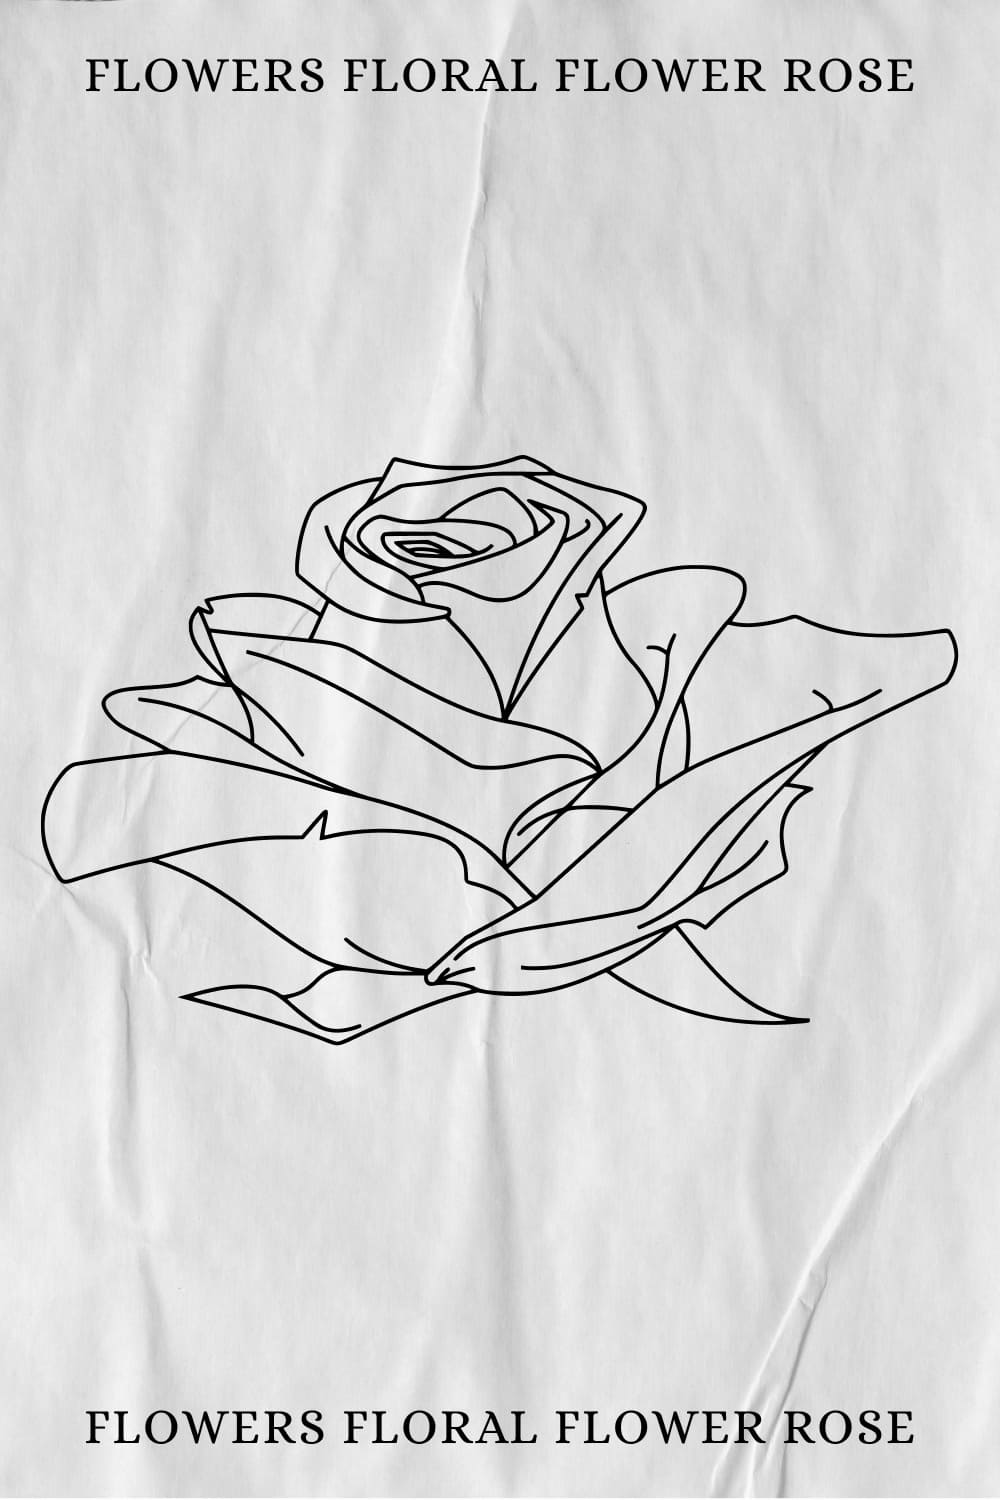 Hand-drawn rose on the old paper.